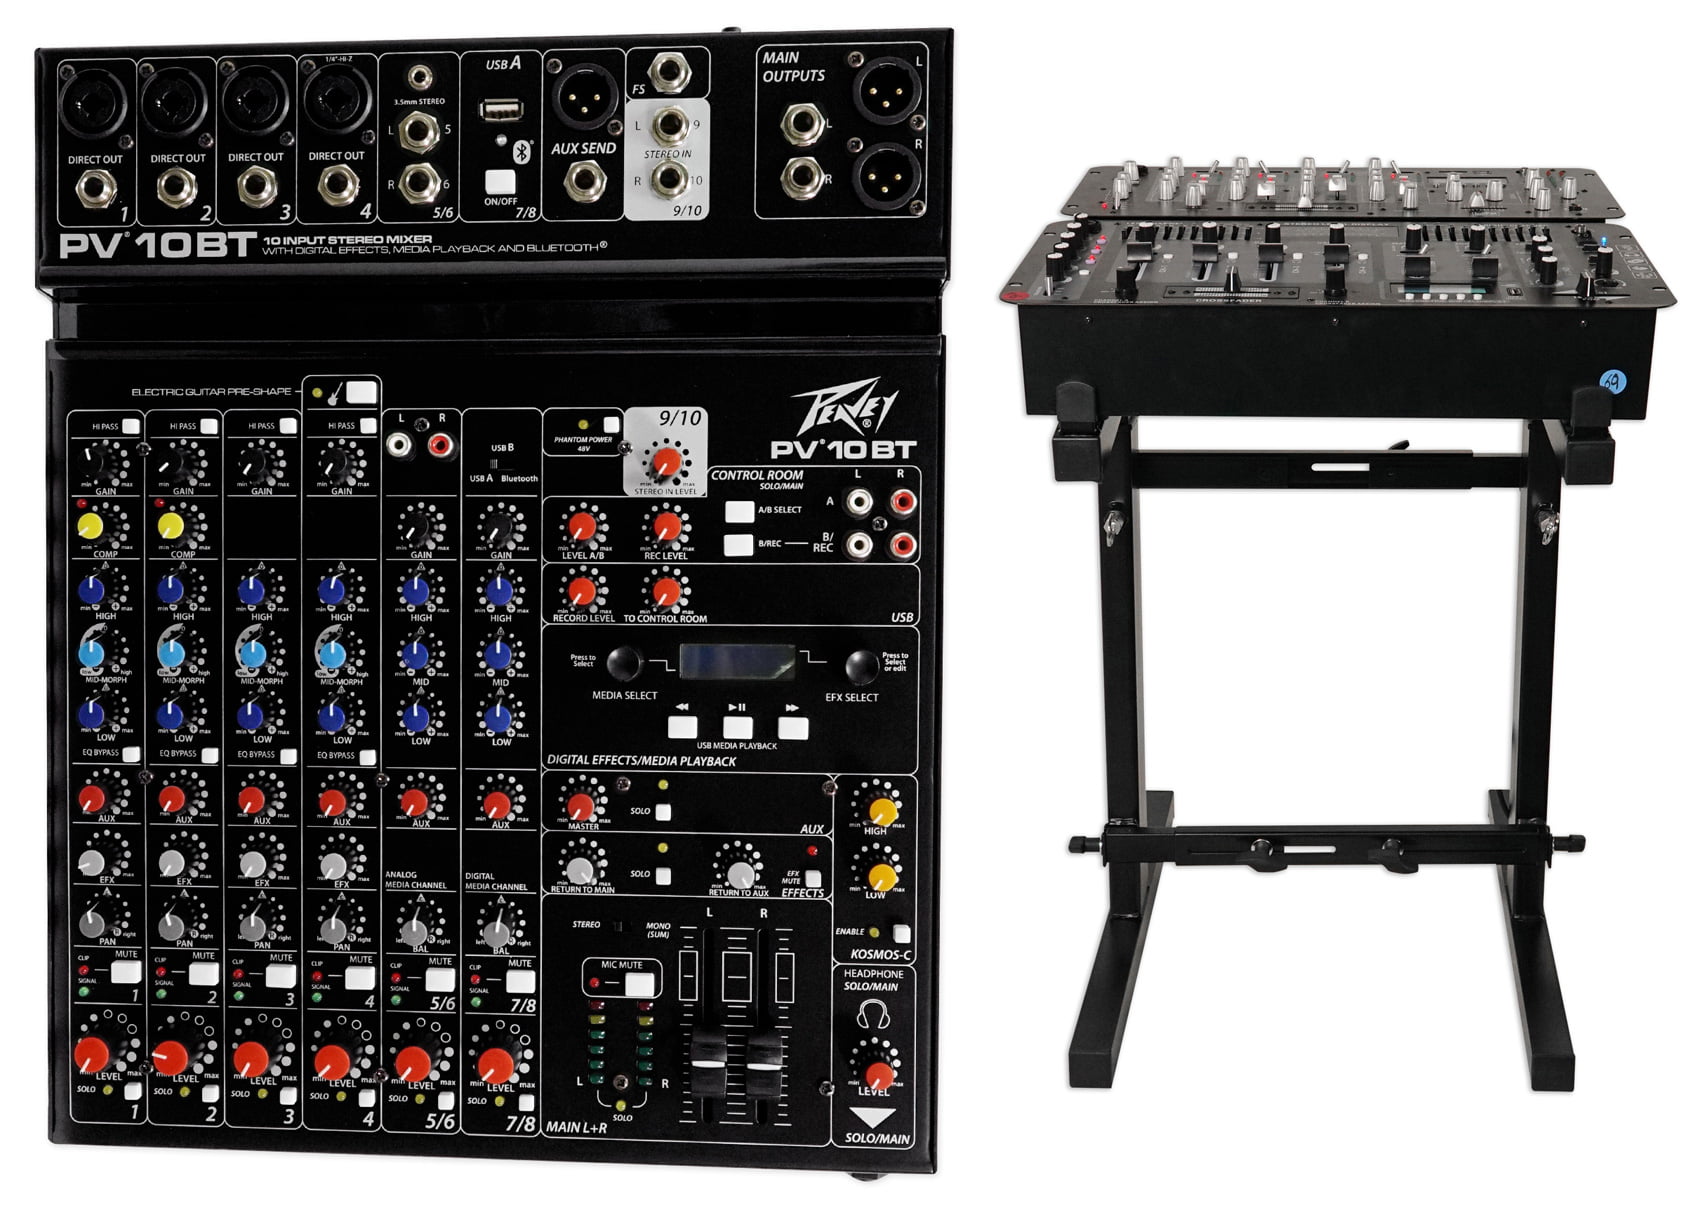 Compressor/Effects and 3 Band EQ + Peavey PV 20 XLR Female to Male Low Z Mic Cables Bluetooth 4 USB Package: Peavey PV 10BT PV10BT Pro Audio Mixer With 4 Mic In 